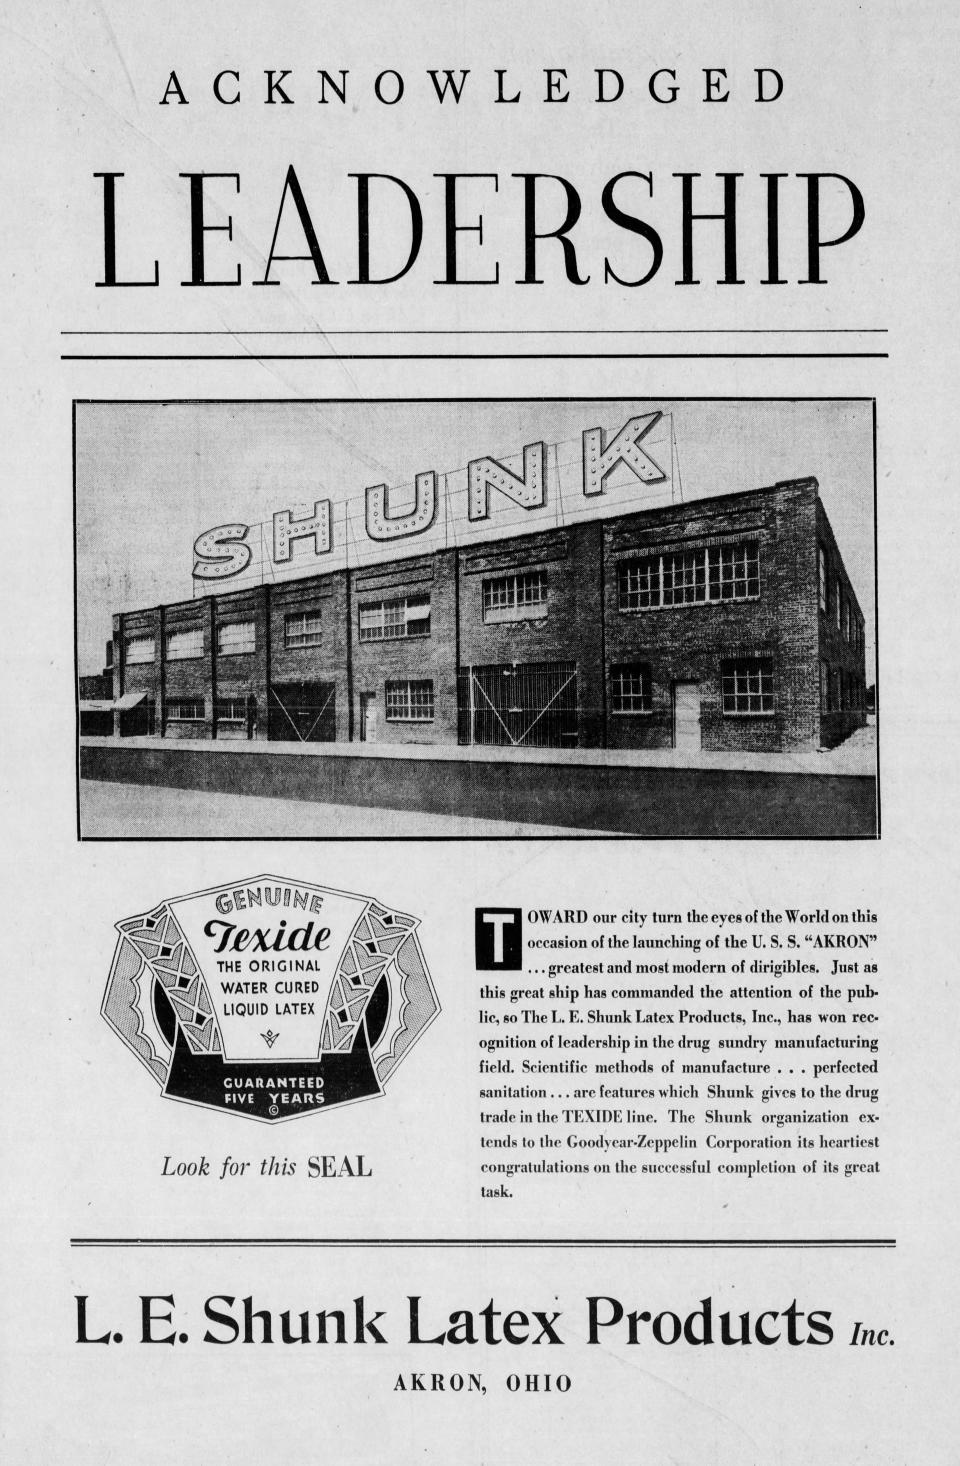 L.E. Shunk Latex Products touts its Morgan Avenue factory in a 1931 advertisement in the Beacon Journal. Three additions were built that year as business boomed.